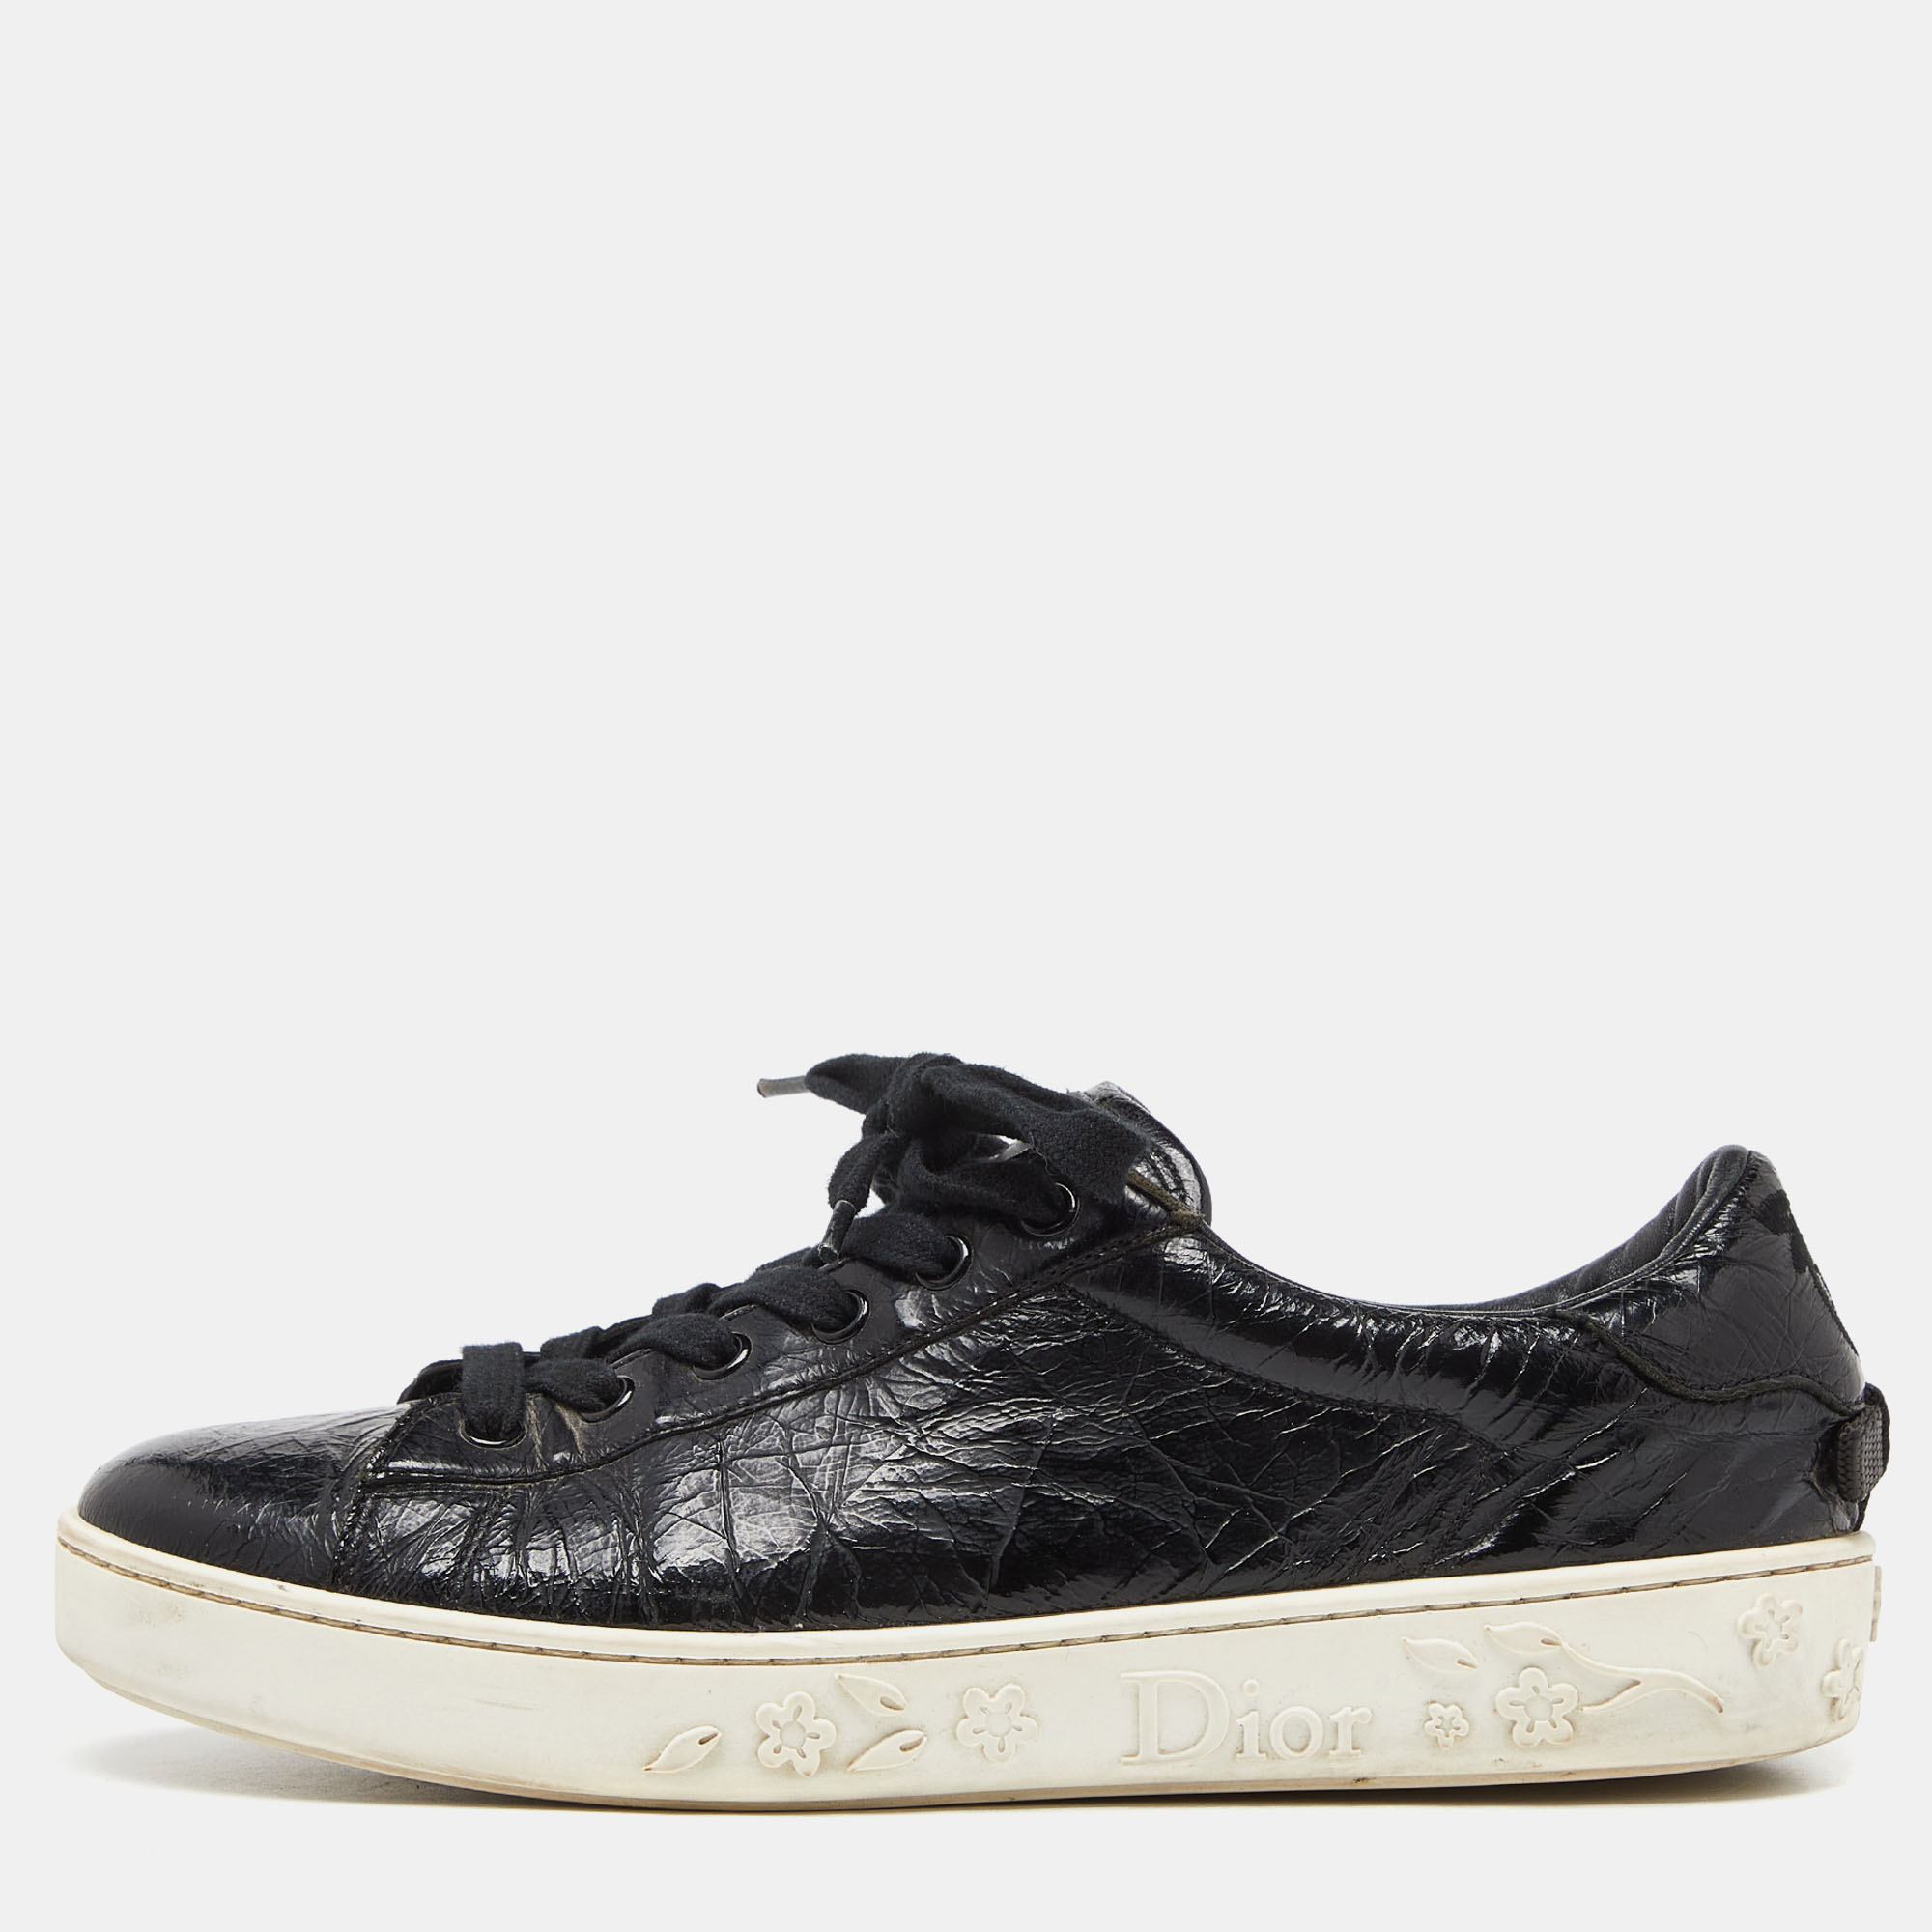 

Dior Black Textured Leather Low Top Sneakers Size